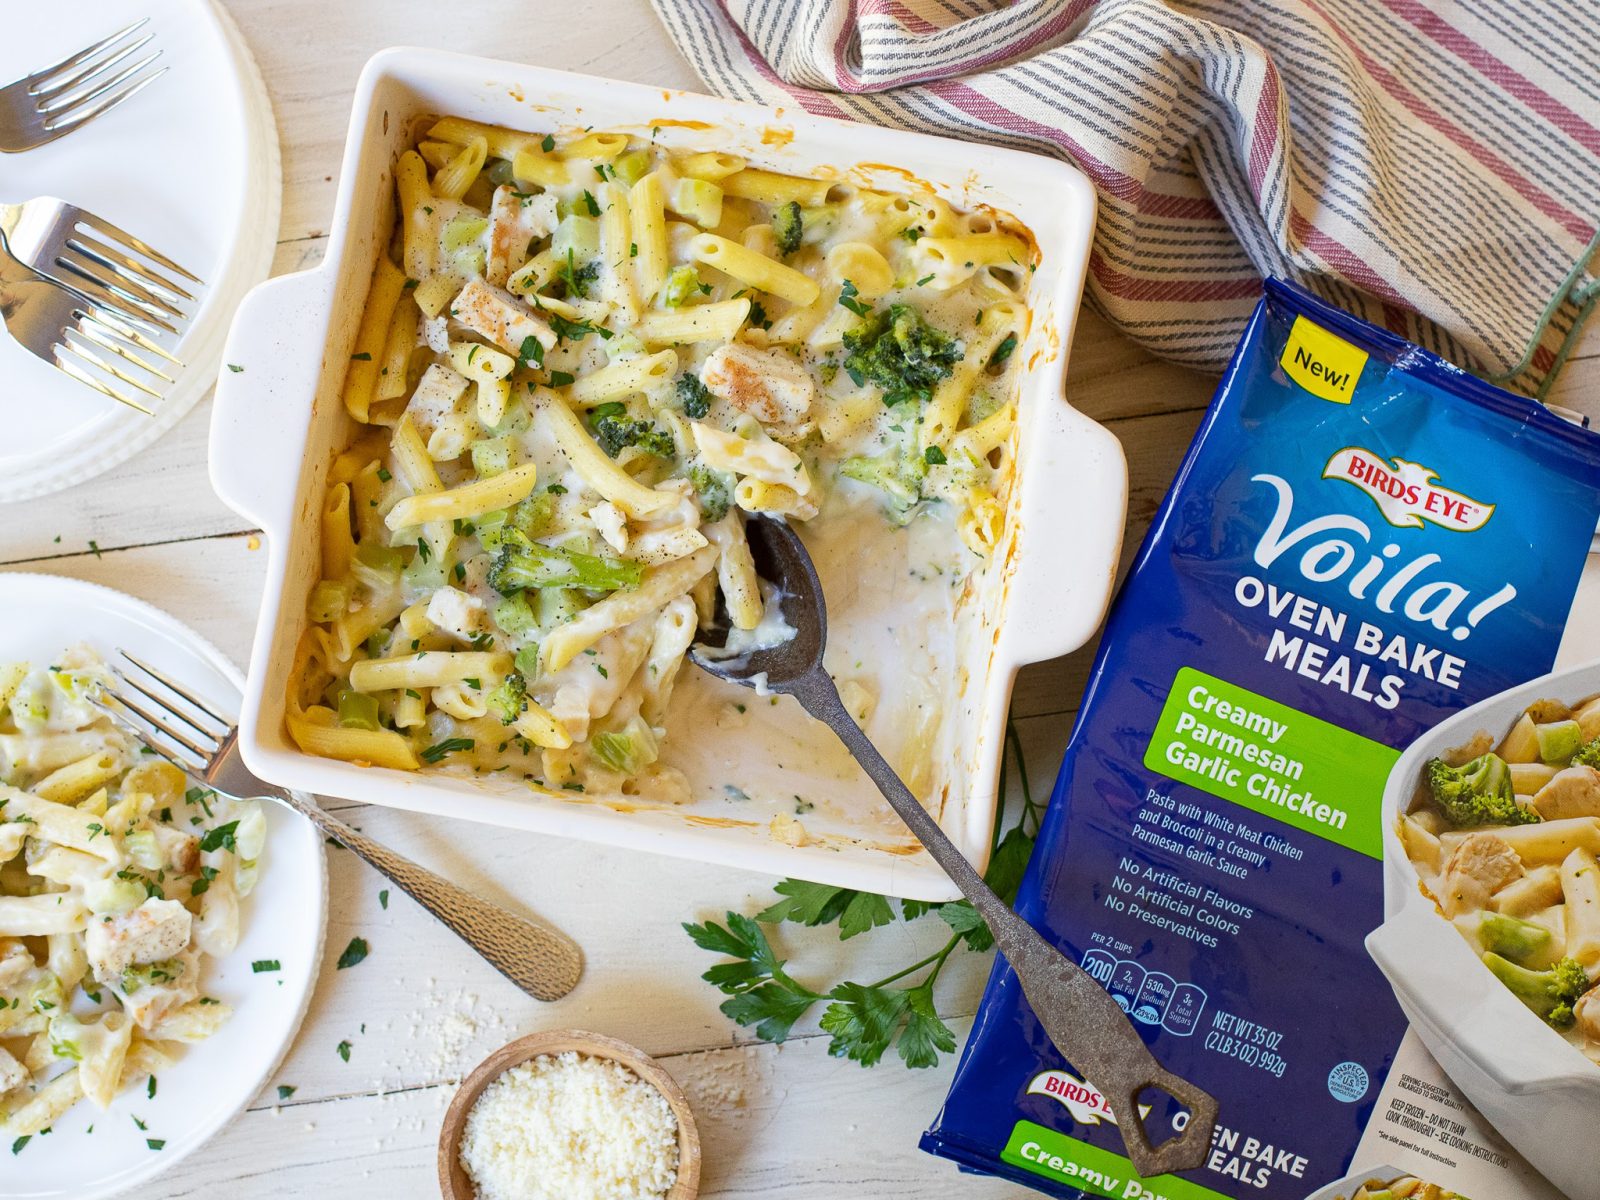 Birds Eye Voila! Oven Baked Meals As Low As $2.85 At Publix (Regular Price $9.69)